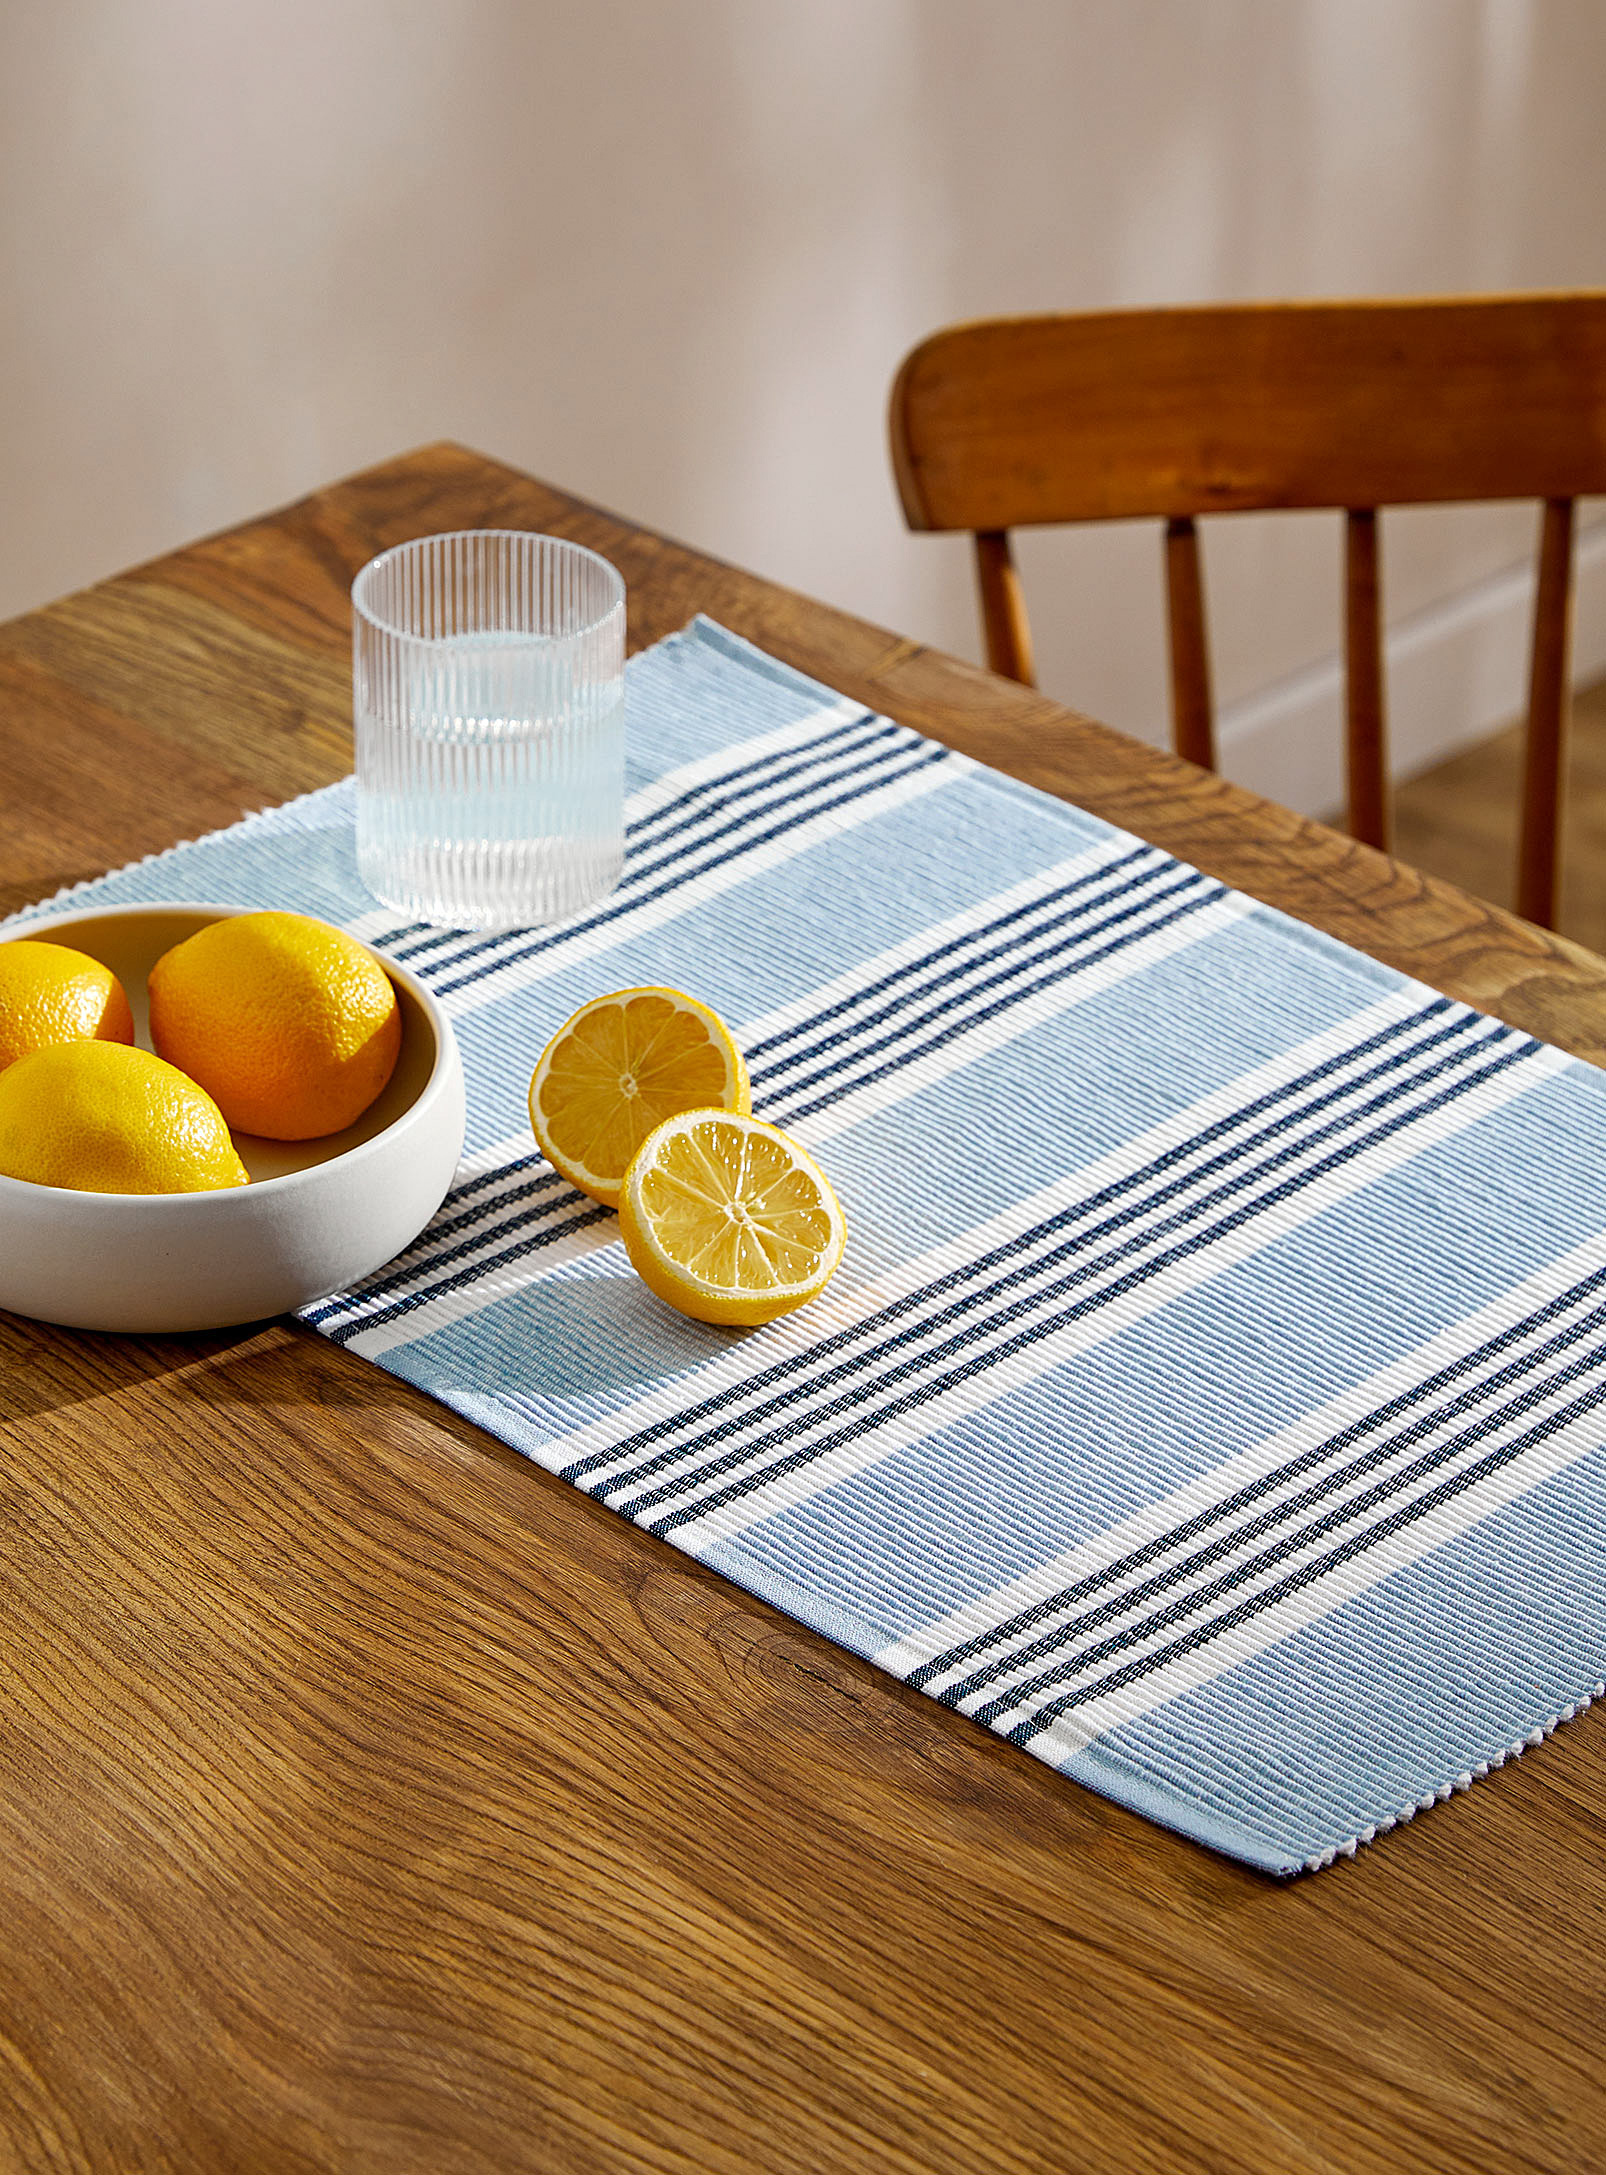 Simons Maison Ocean Stripes Recycled Cotton Placemat In Patterned Blue